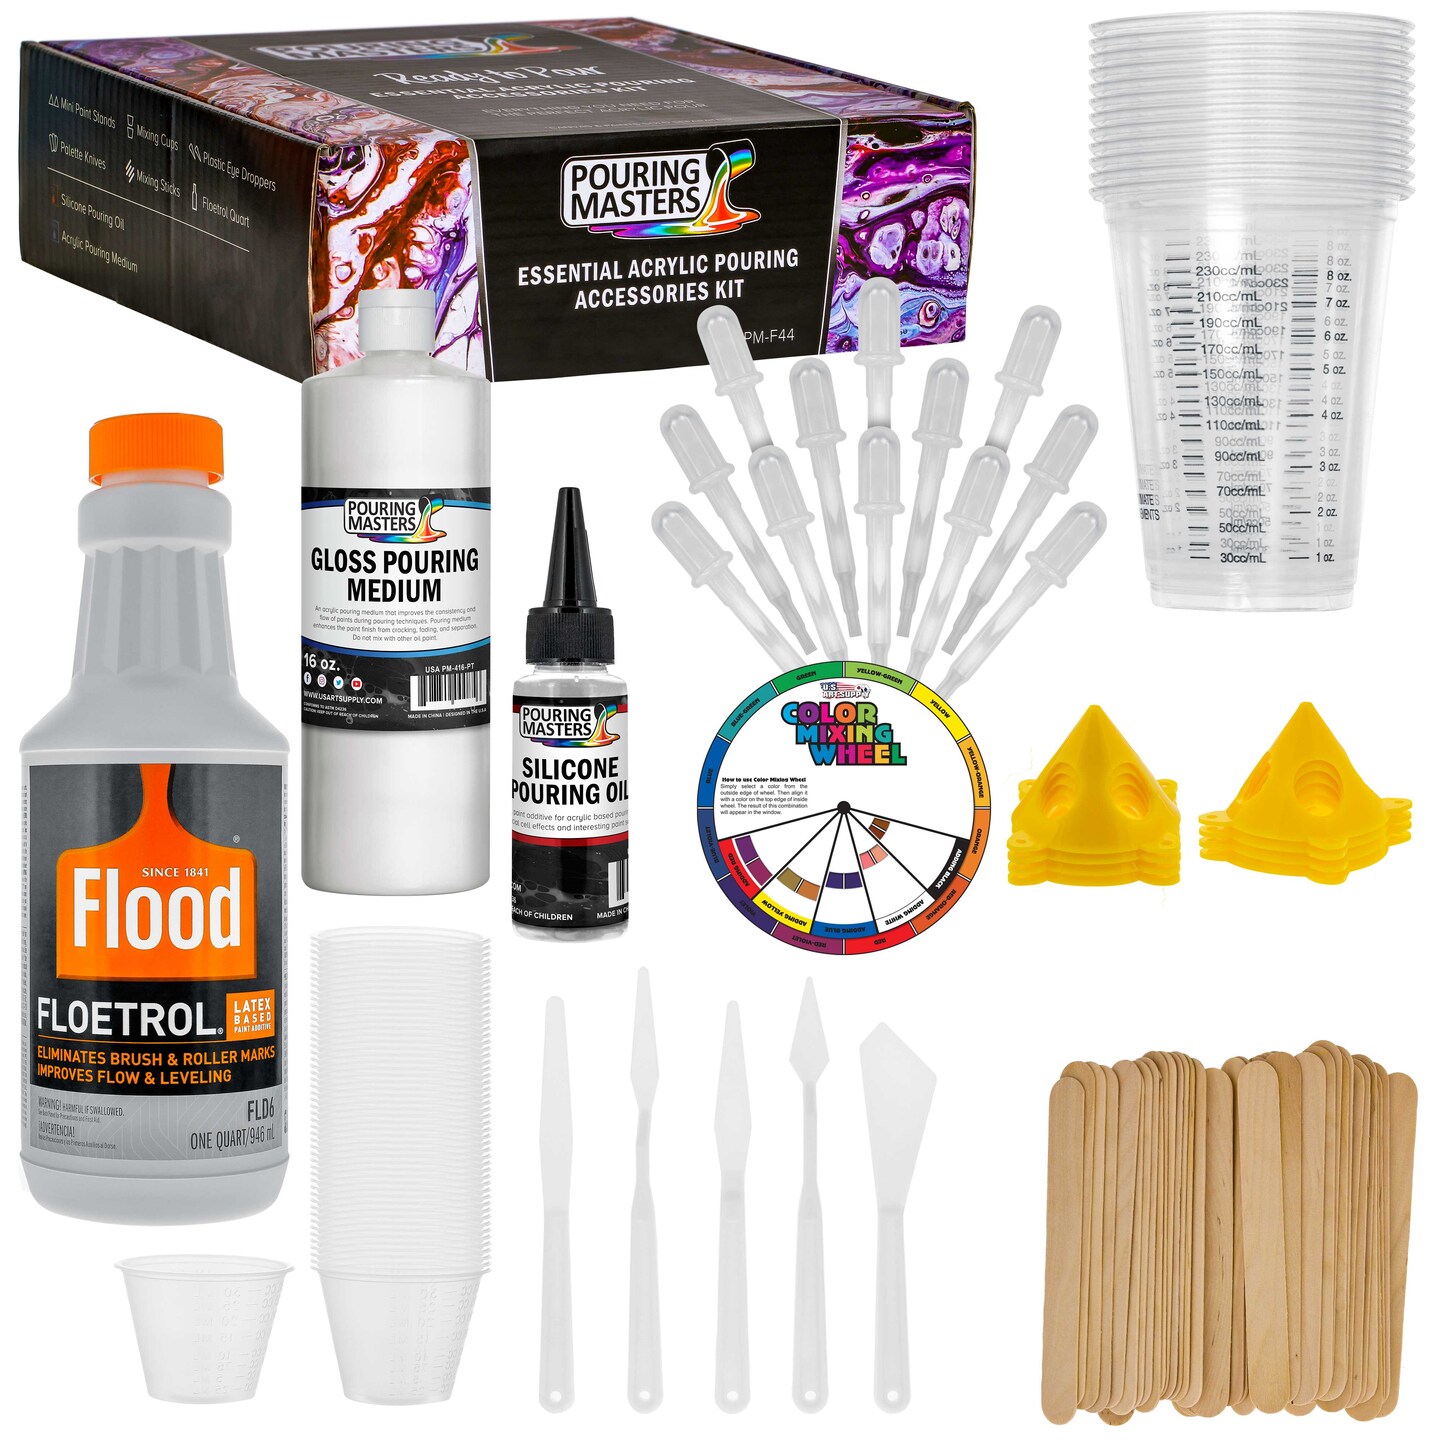  Acrylic Pouring Paint Kit with Canvas - Deluxe Paint Pouring  Supplies, Painting Set for Adults and Kids, Pour Paint Kit for Beginners  Fluid Acrylic Paint Set for Kids